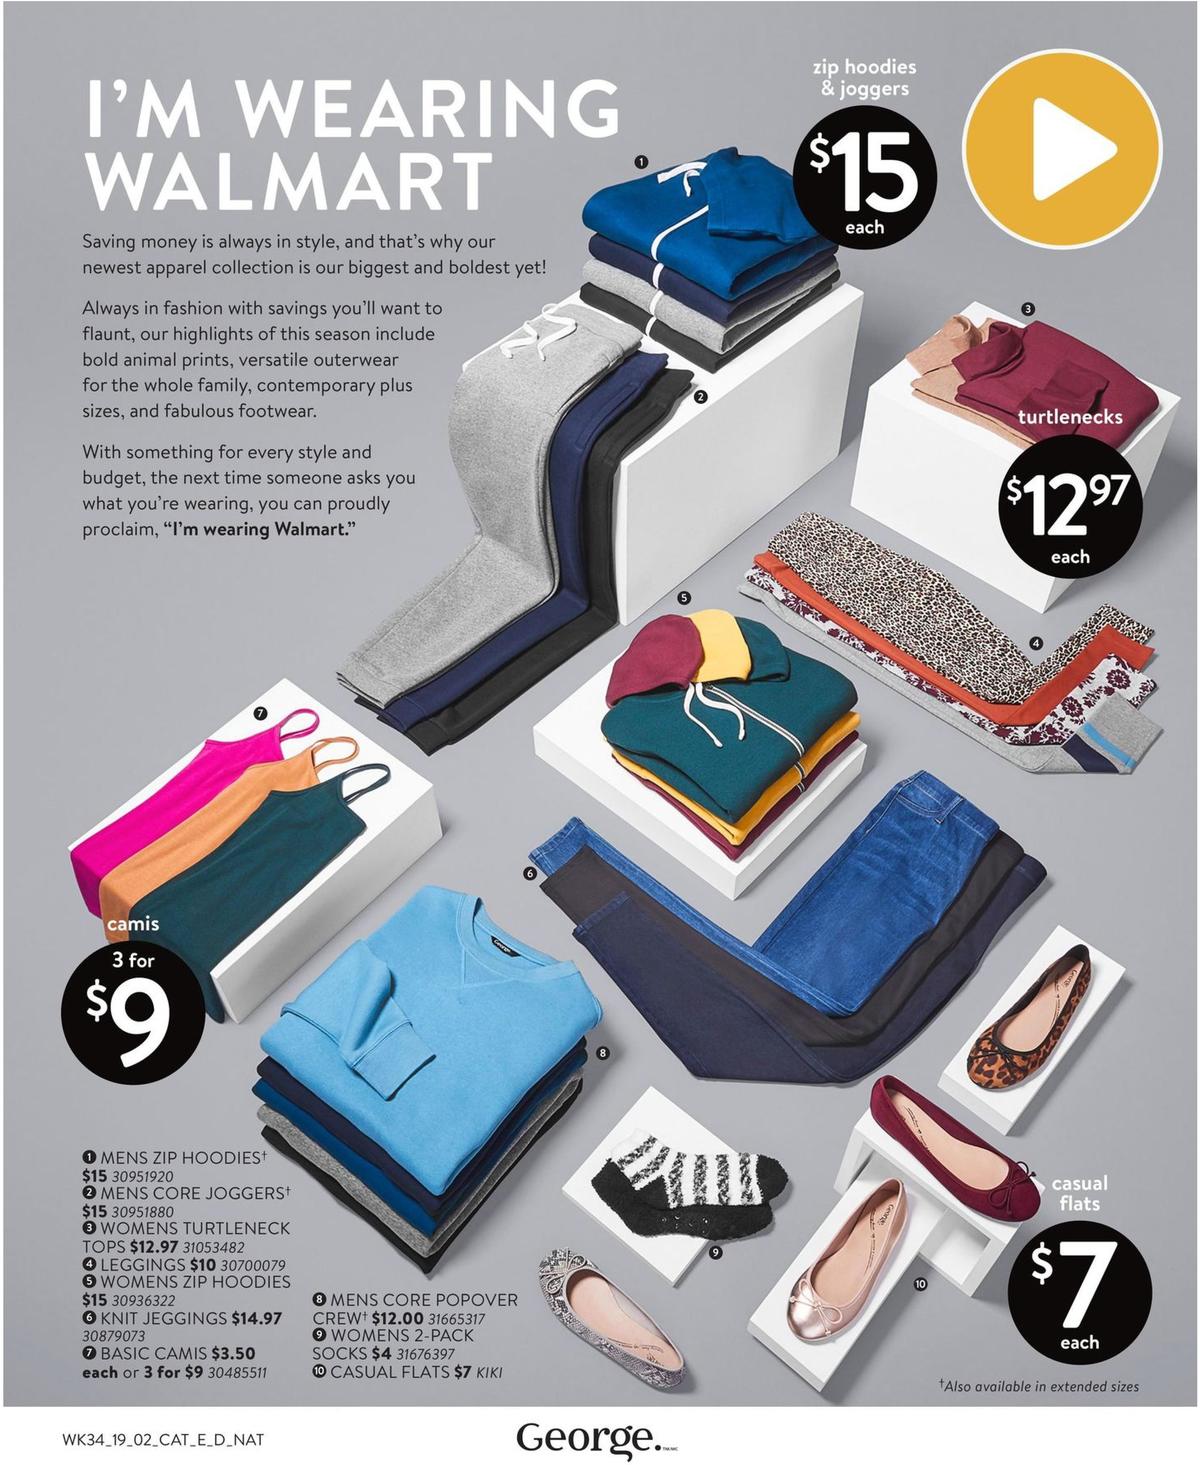 Walmart Style Book Flyer from September 12